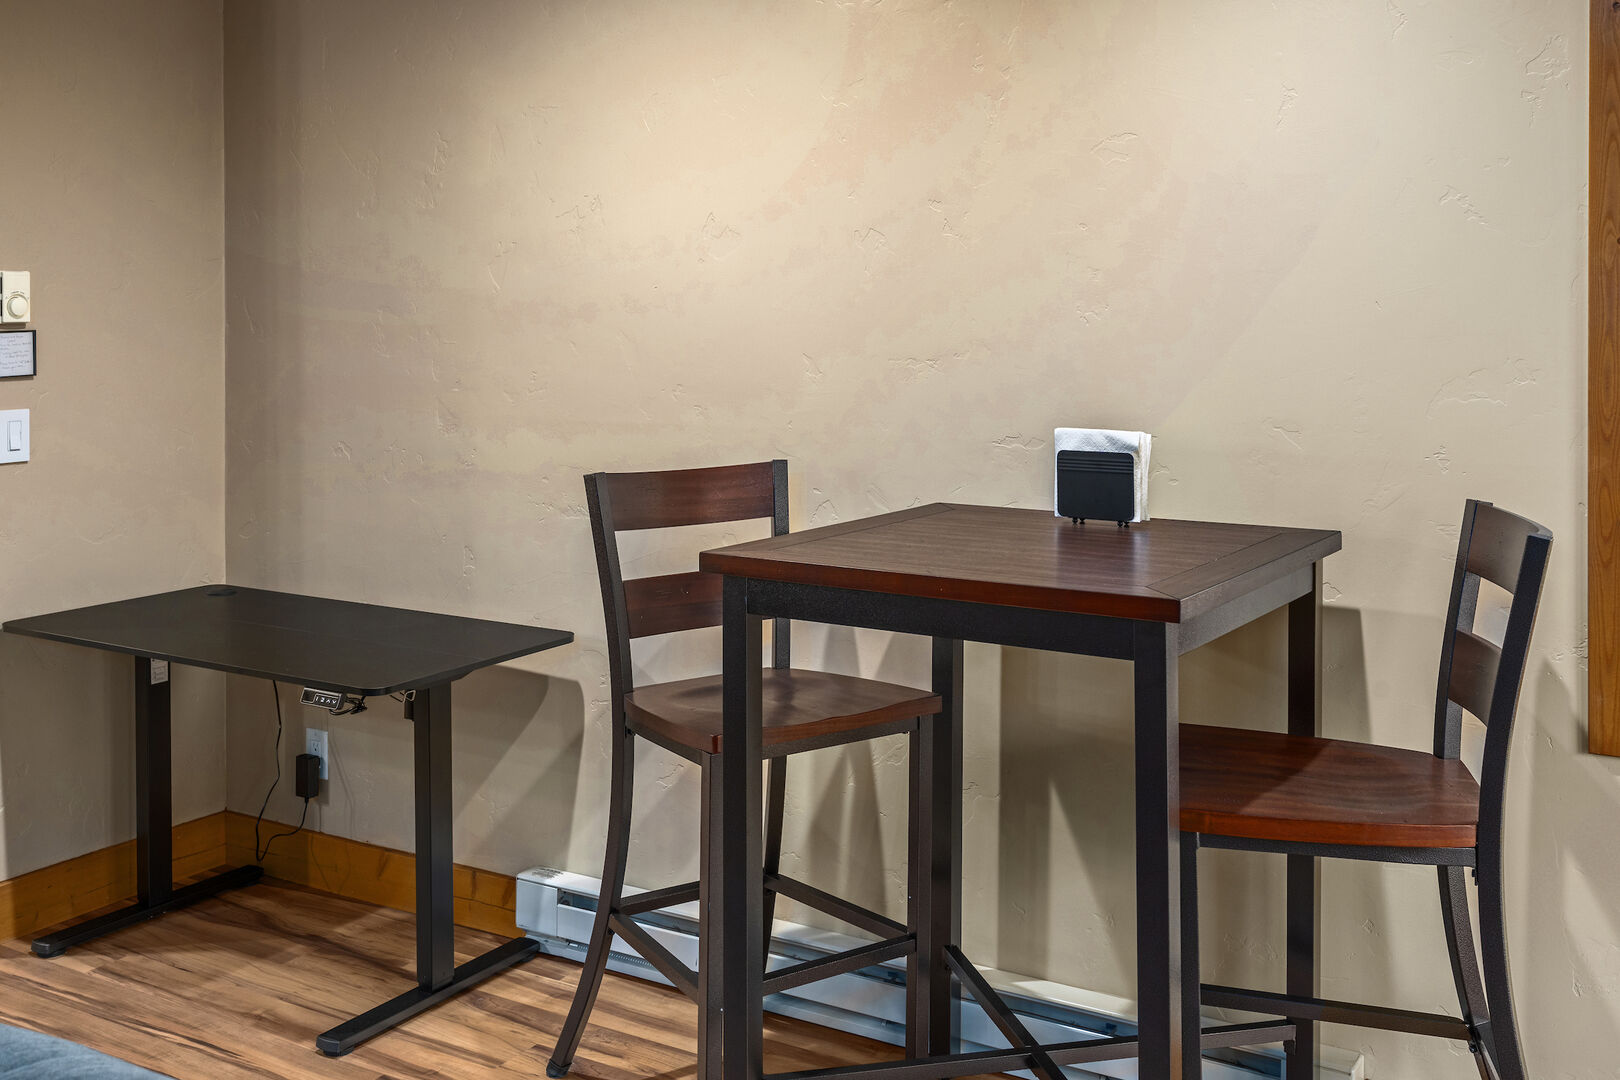 Small dining table can be pulled away from the wall and more seating added